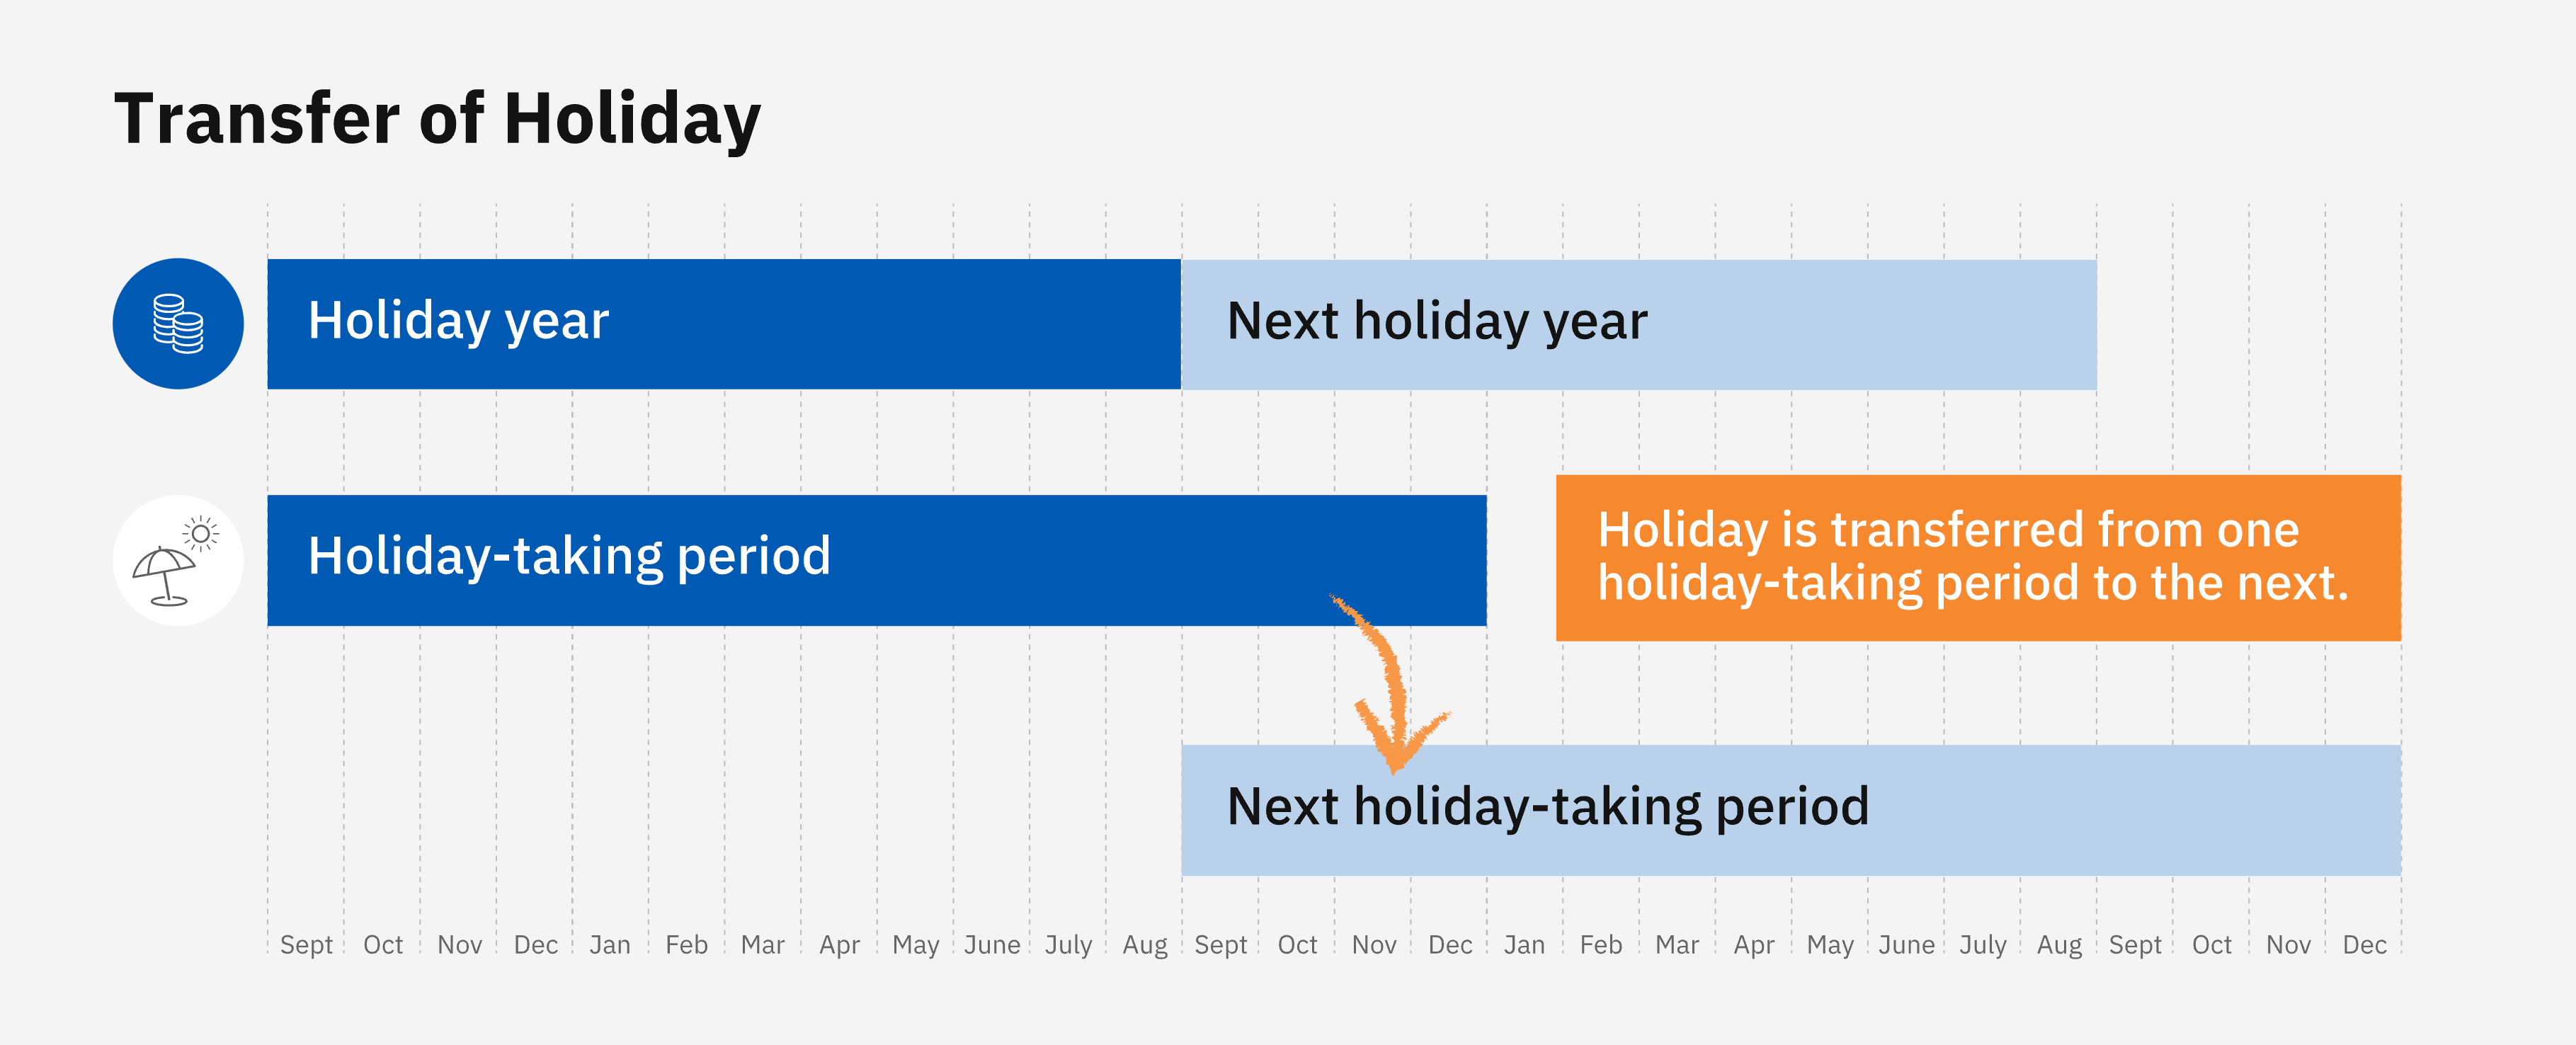 The graphic shows holiday transferred from a holiday-taking period to the next holiday-taking period.